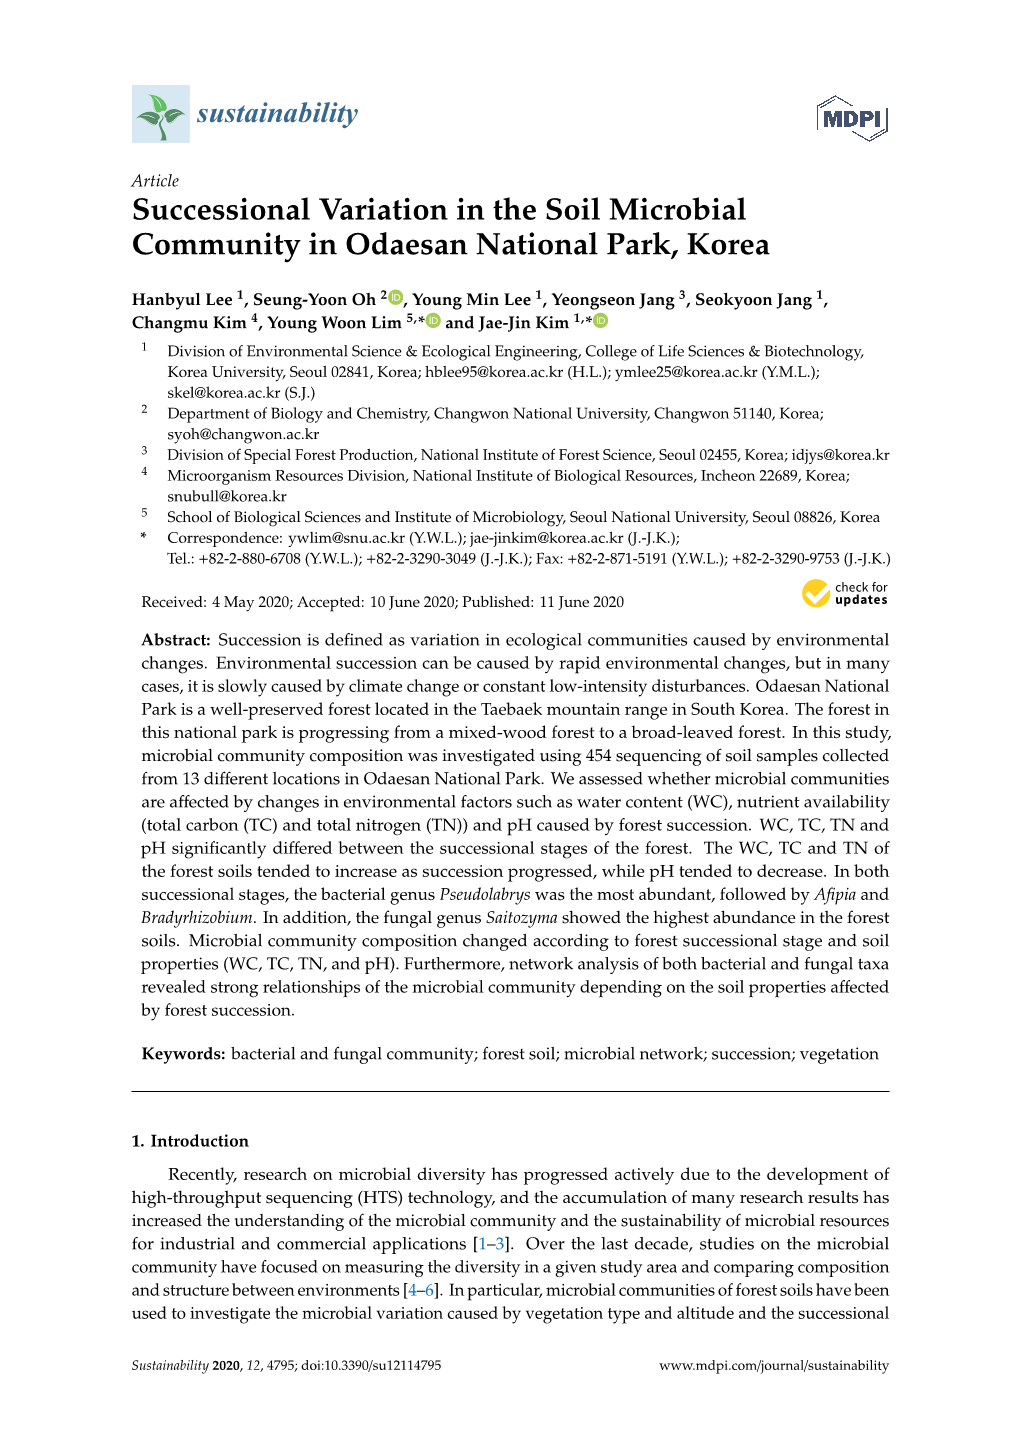 Successional Variation in the Soil Microbial Community in Odaesan National Park, Korea